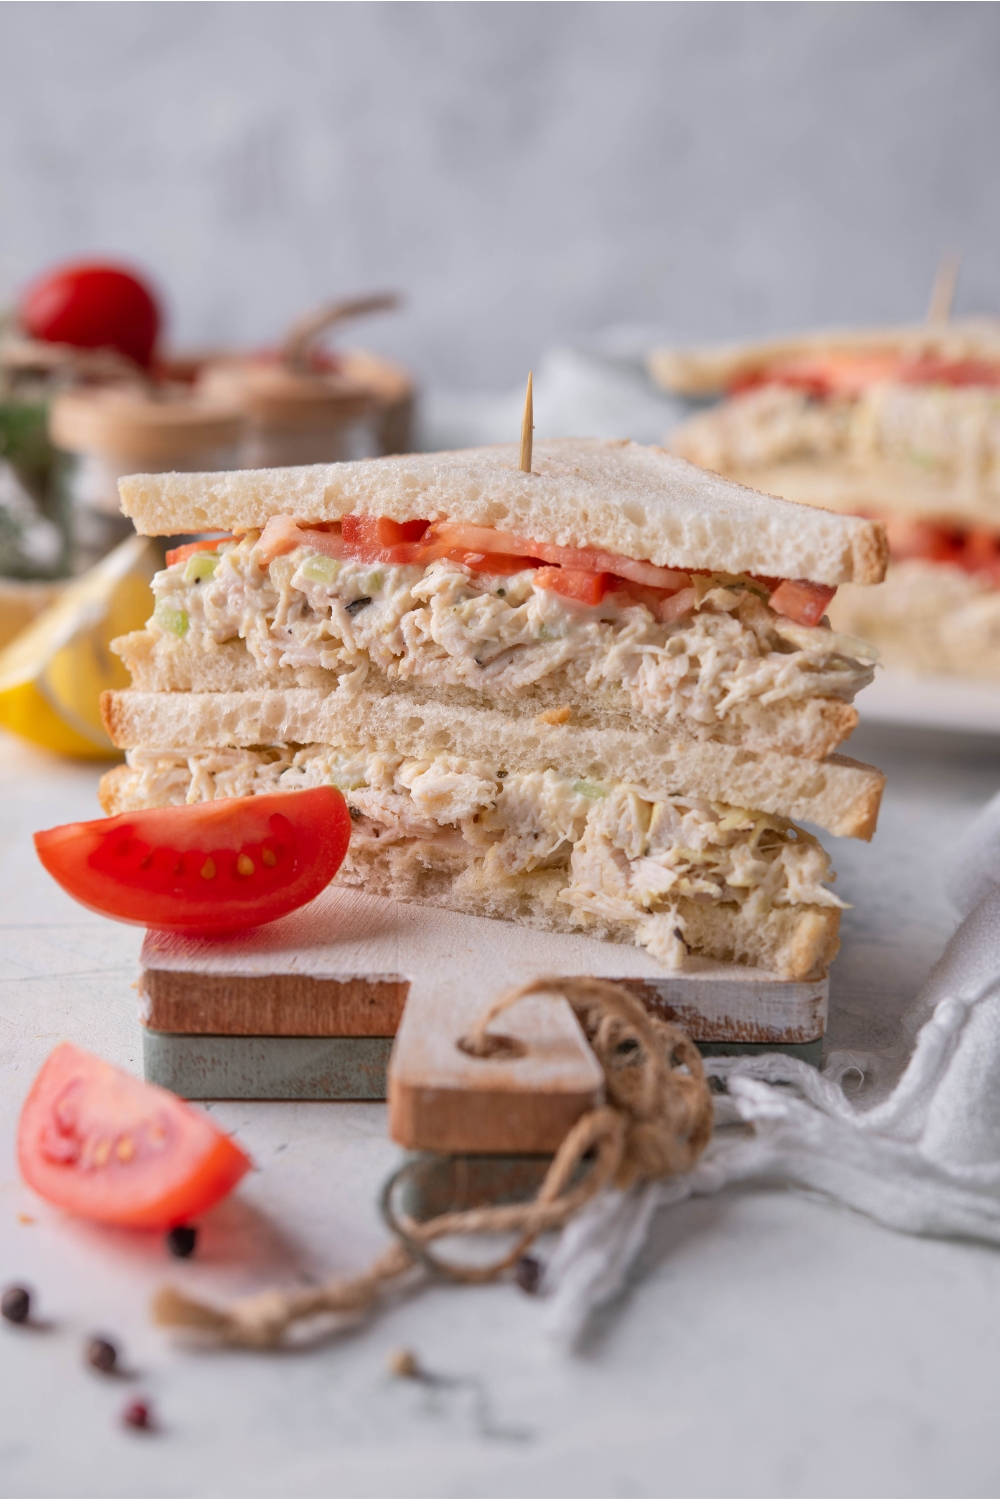 A chicken salad sandwich with tomato cut in half with both halves on top of each other on a serving board with a tomato wedge next to it.